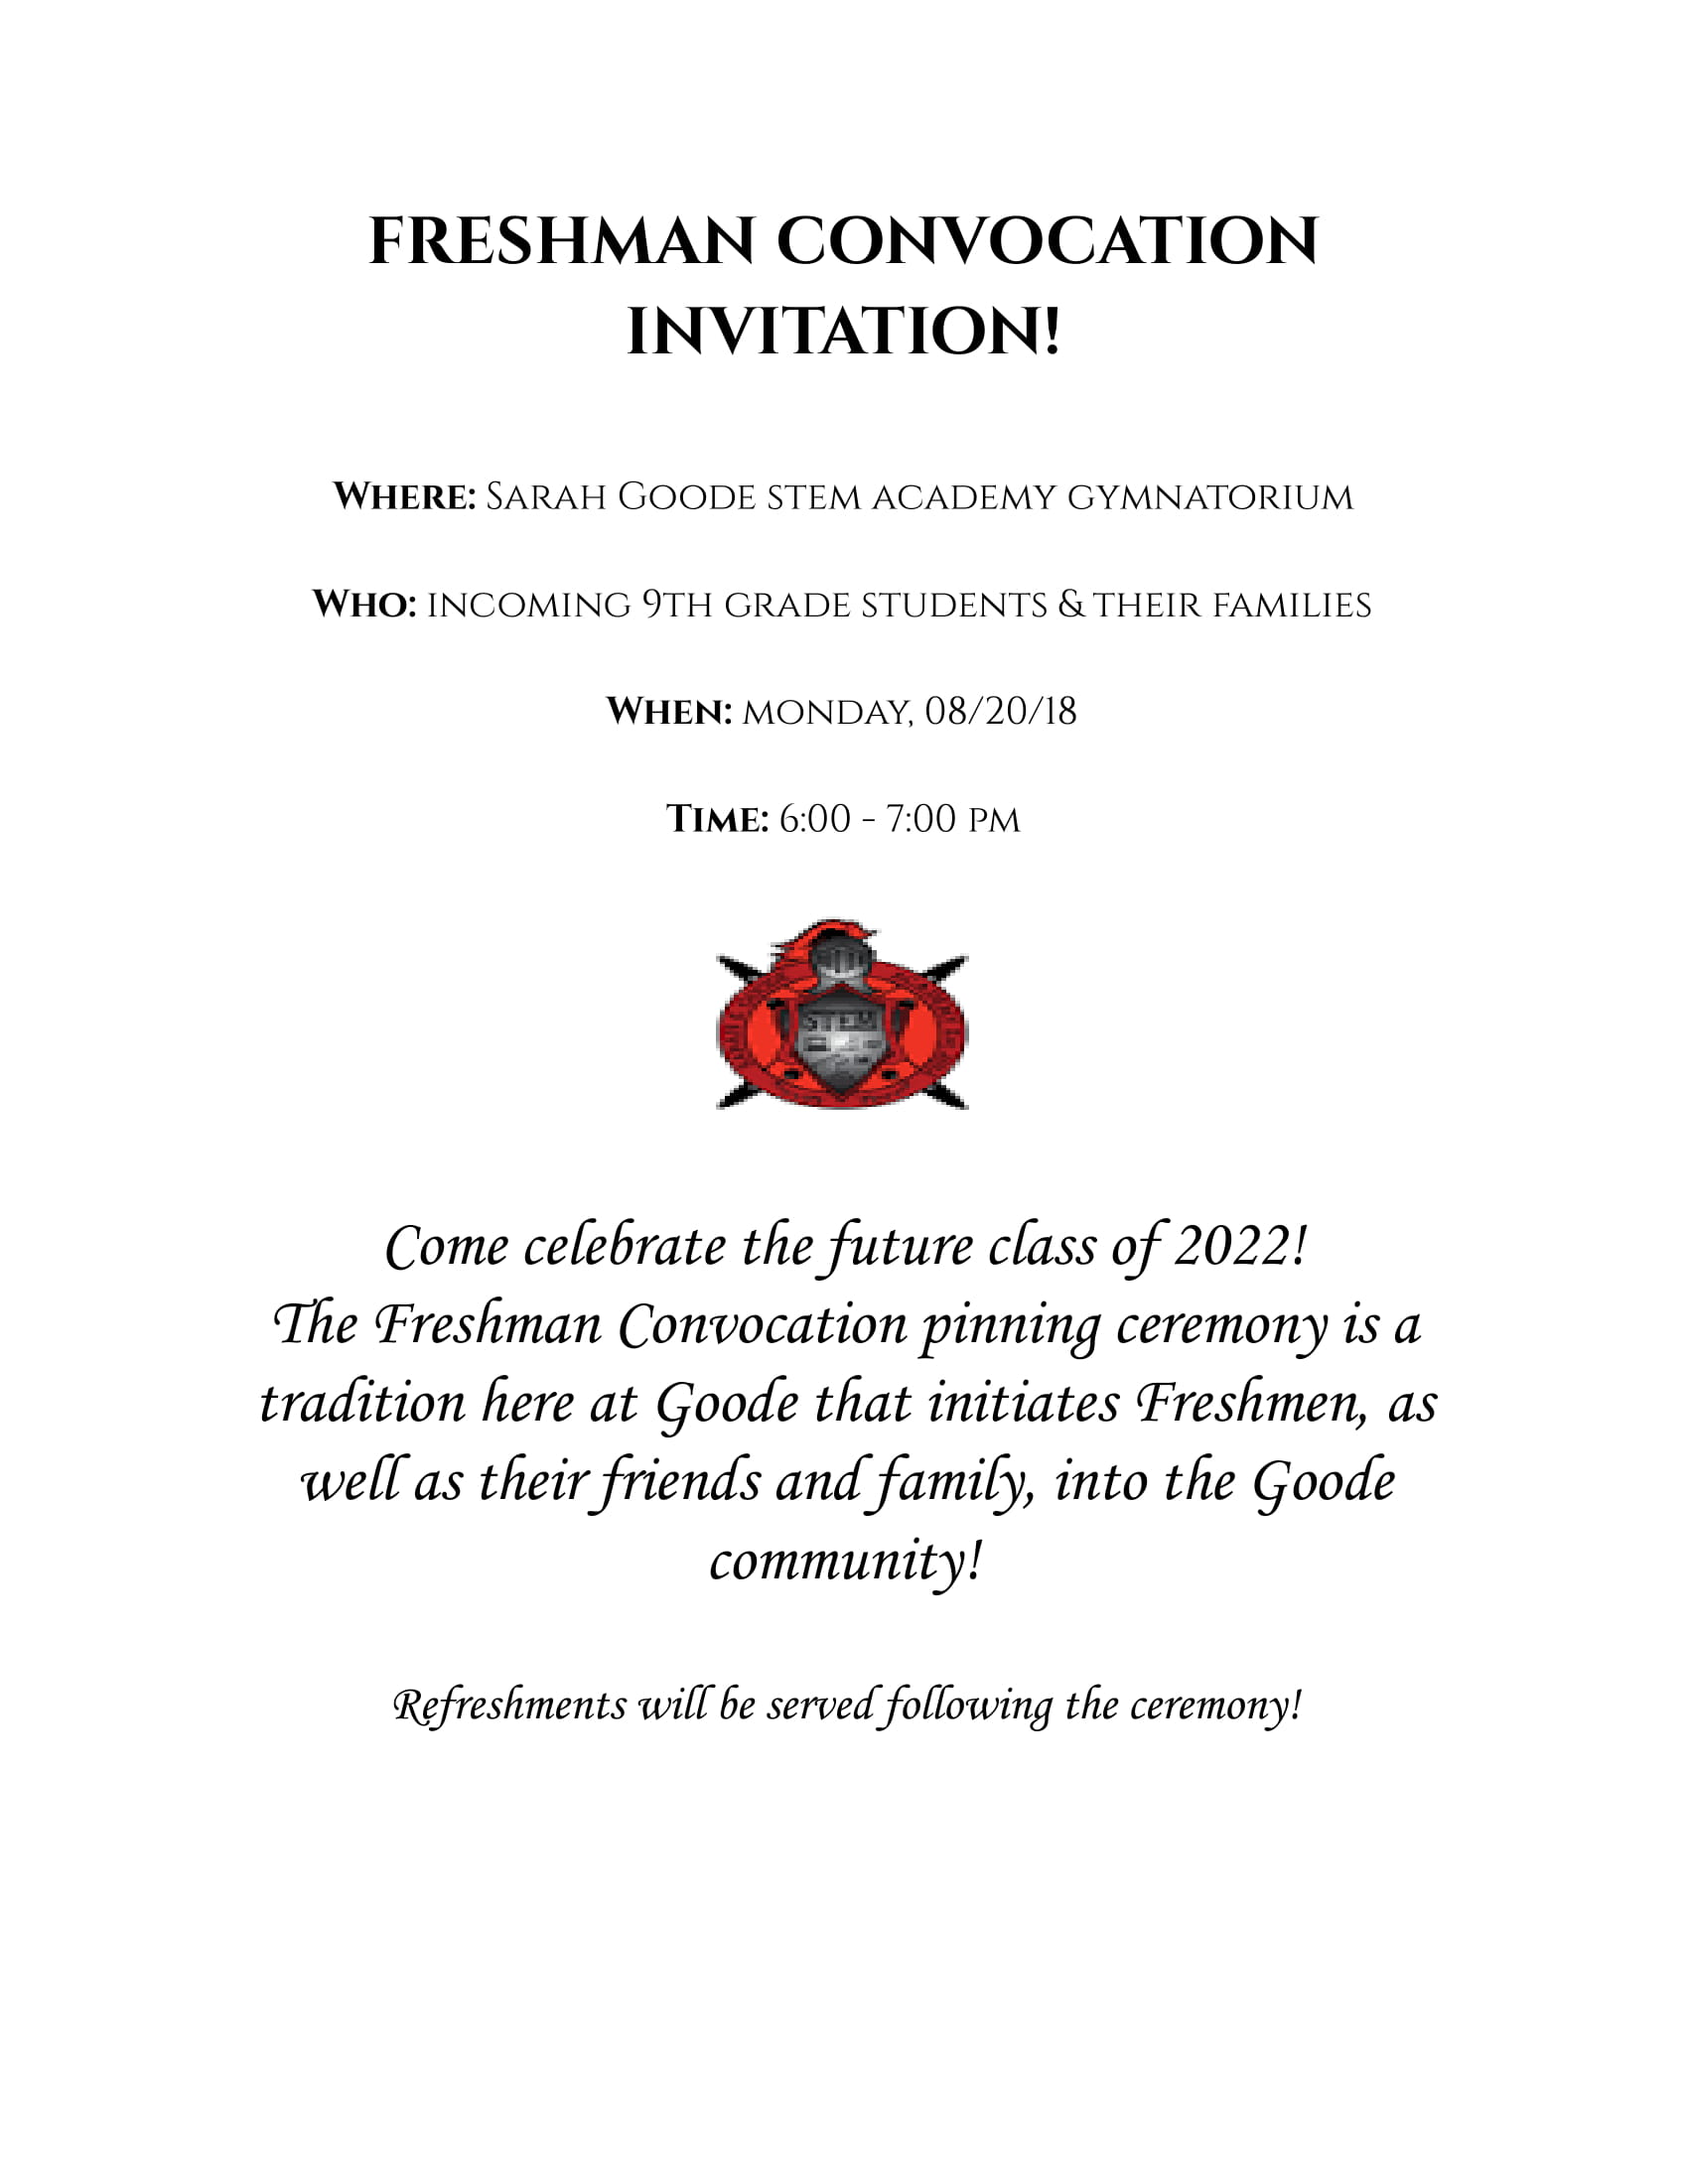 Freshman Convocation Invitation! August 20th - START TIME CHANGED TO 6PM